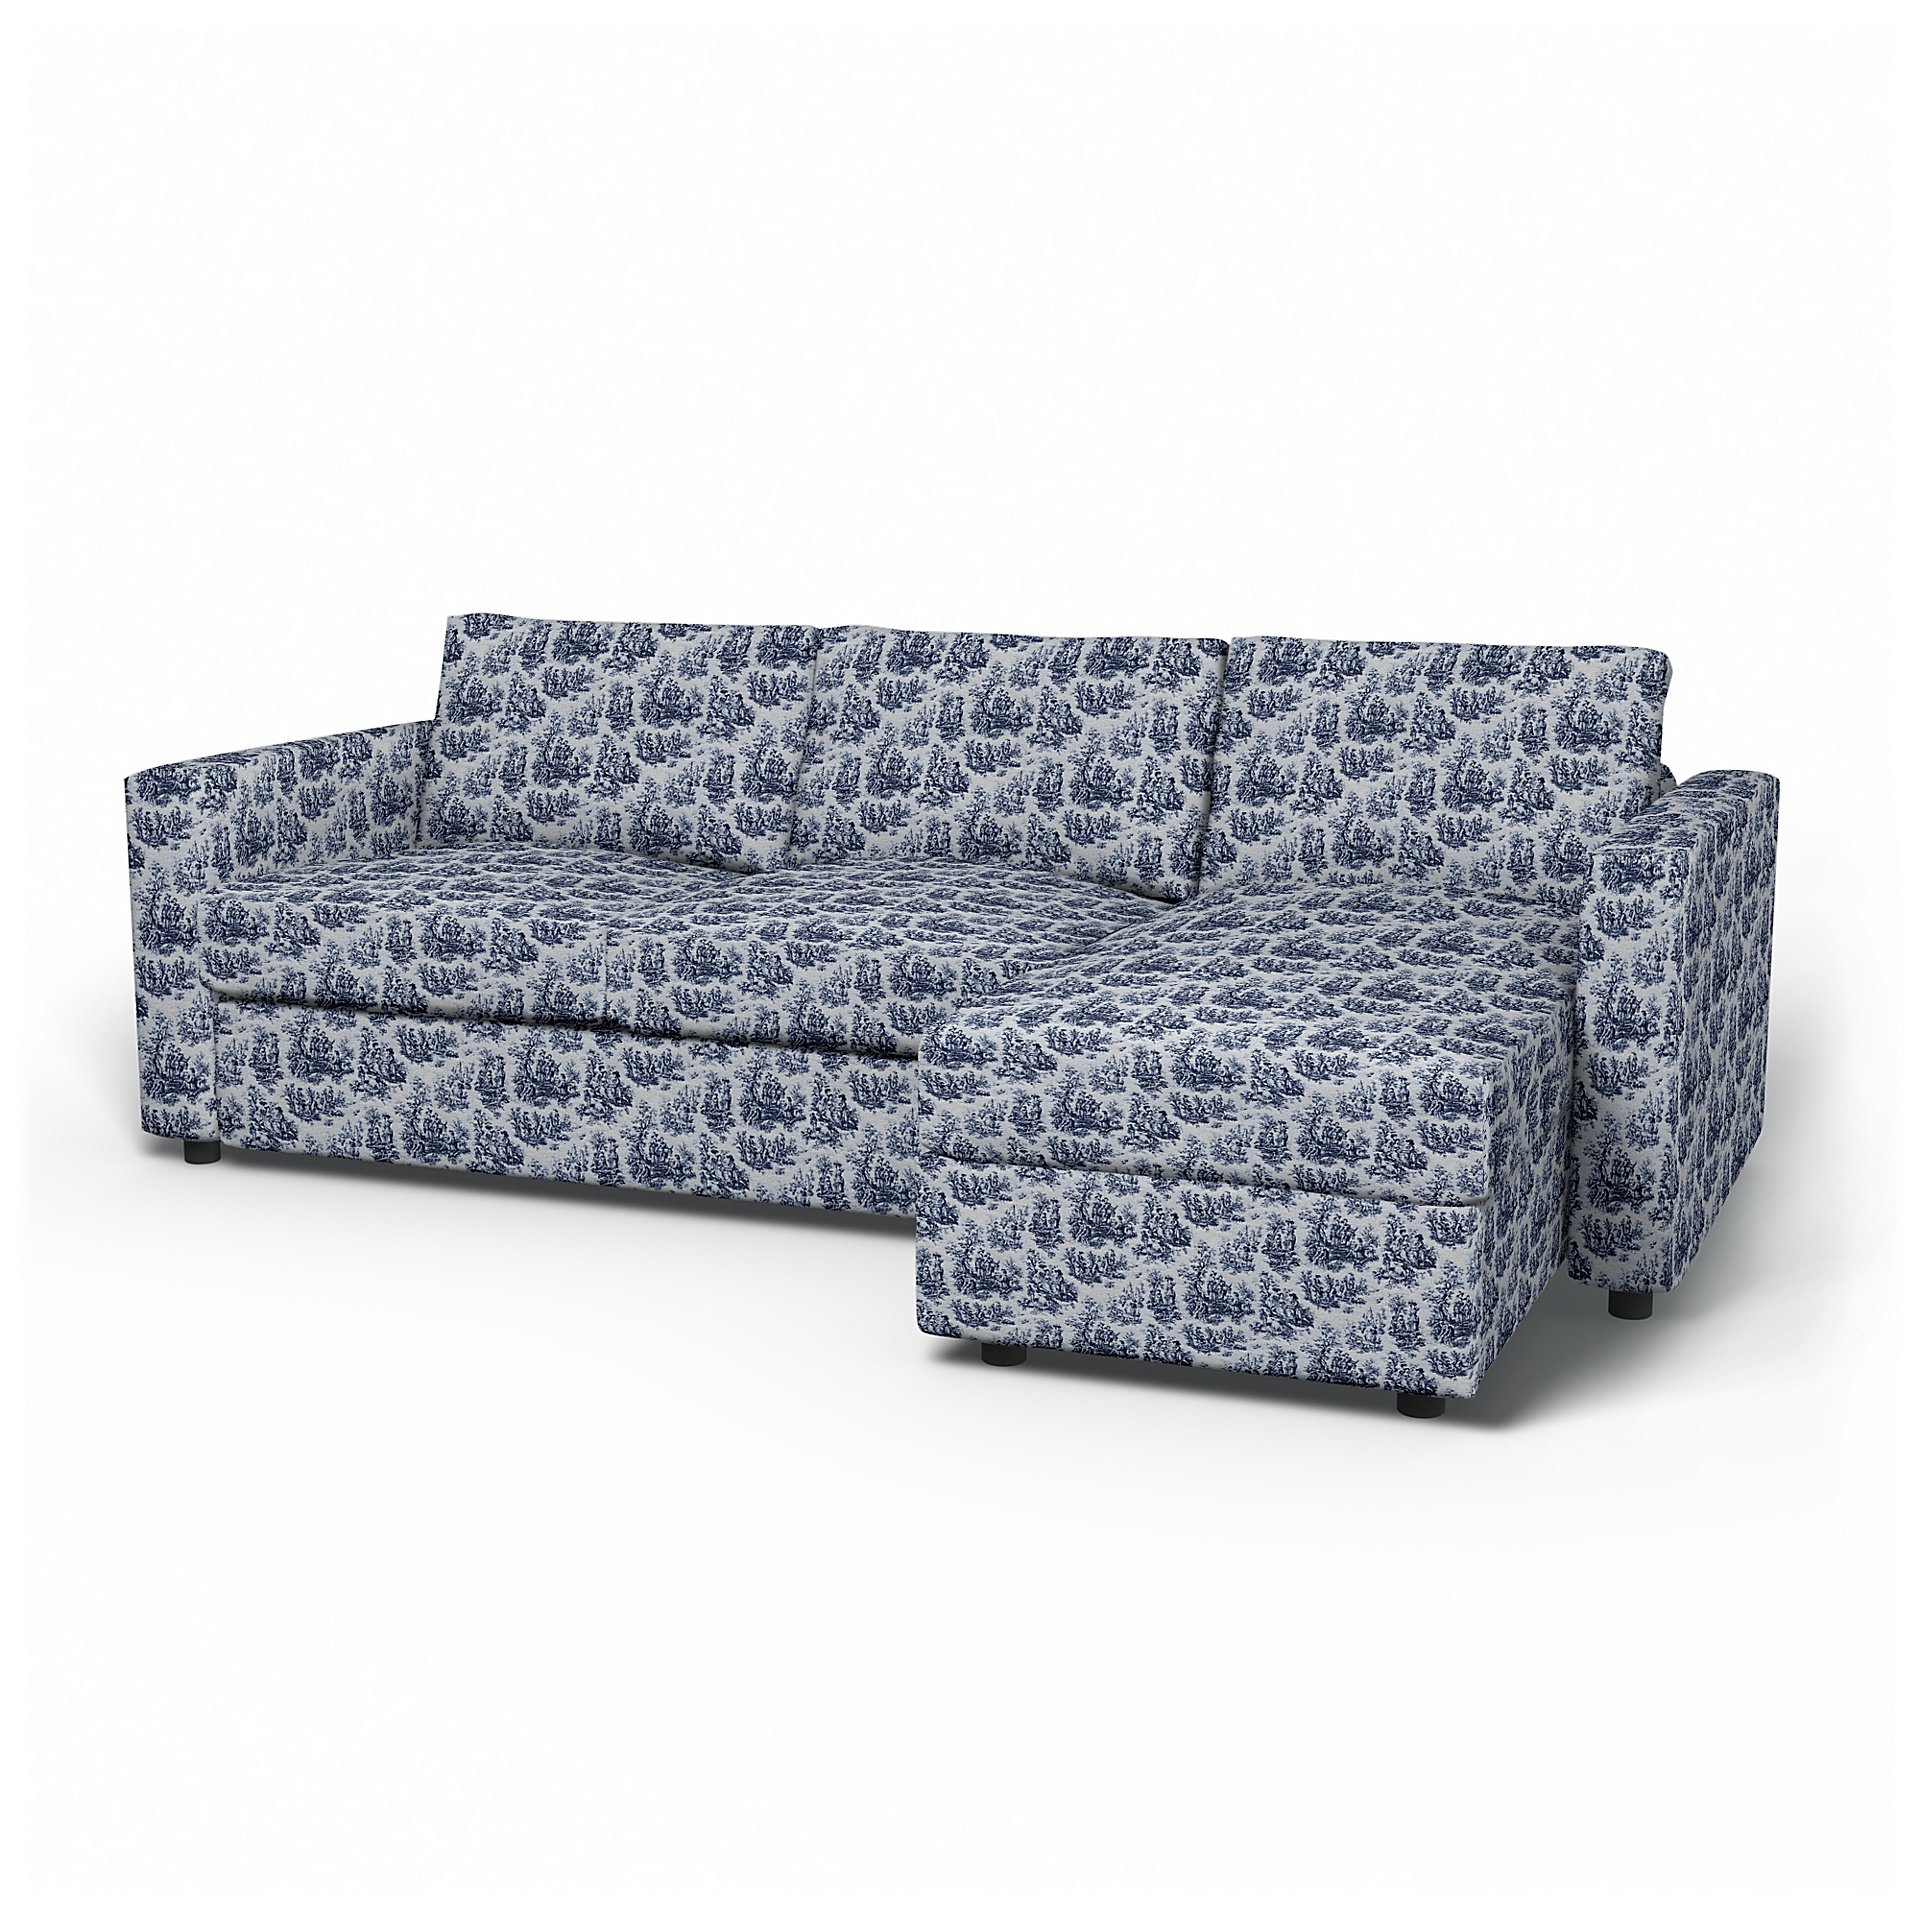 IKEA - Vimle 2 Seater Sofa with Chaise Cover, Dark Blue, Boucle & Texture - Bemz